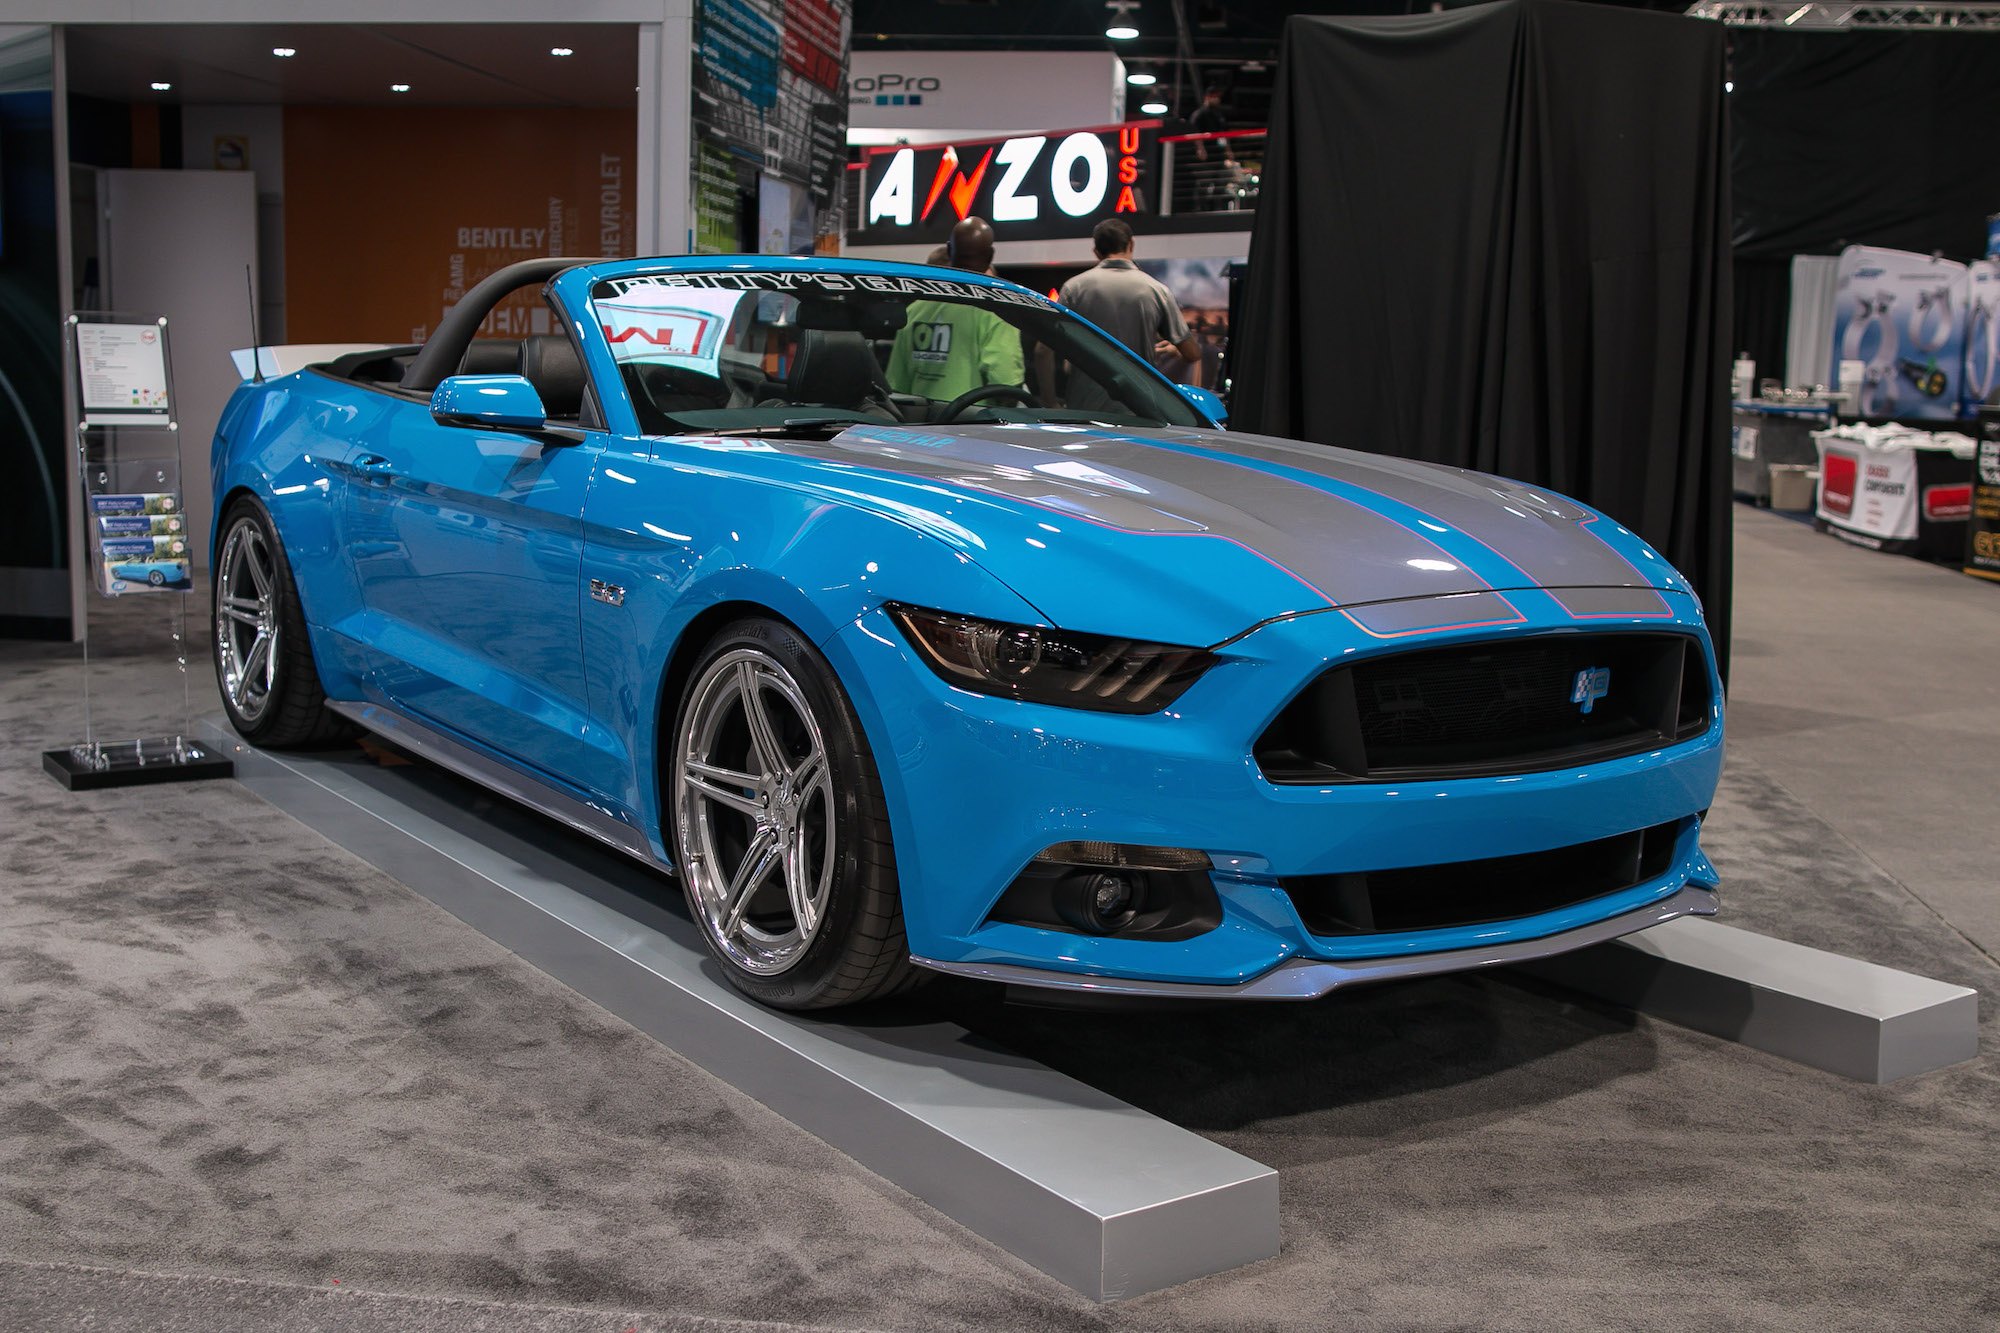 Dark Smoke Halo Headlights on Blue Convertible Ford Mustang - Photo by Forgeline Motorsports